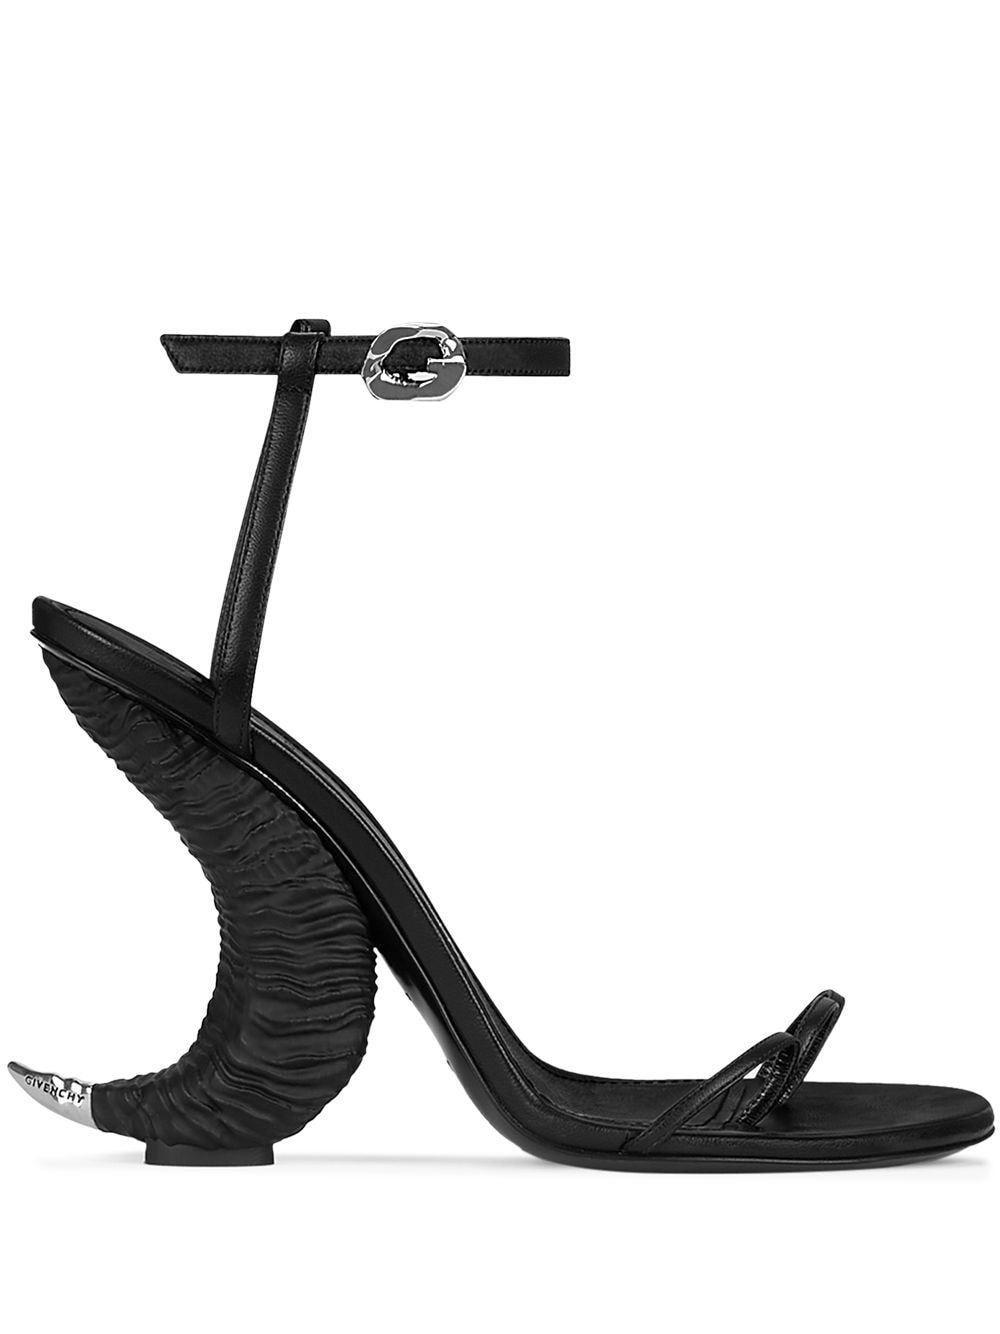 Givenchy Triple Toes 105mm Horn sandals - Black von Givenchy